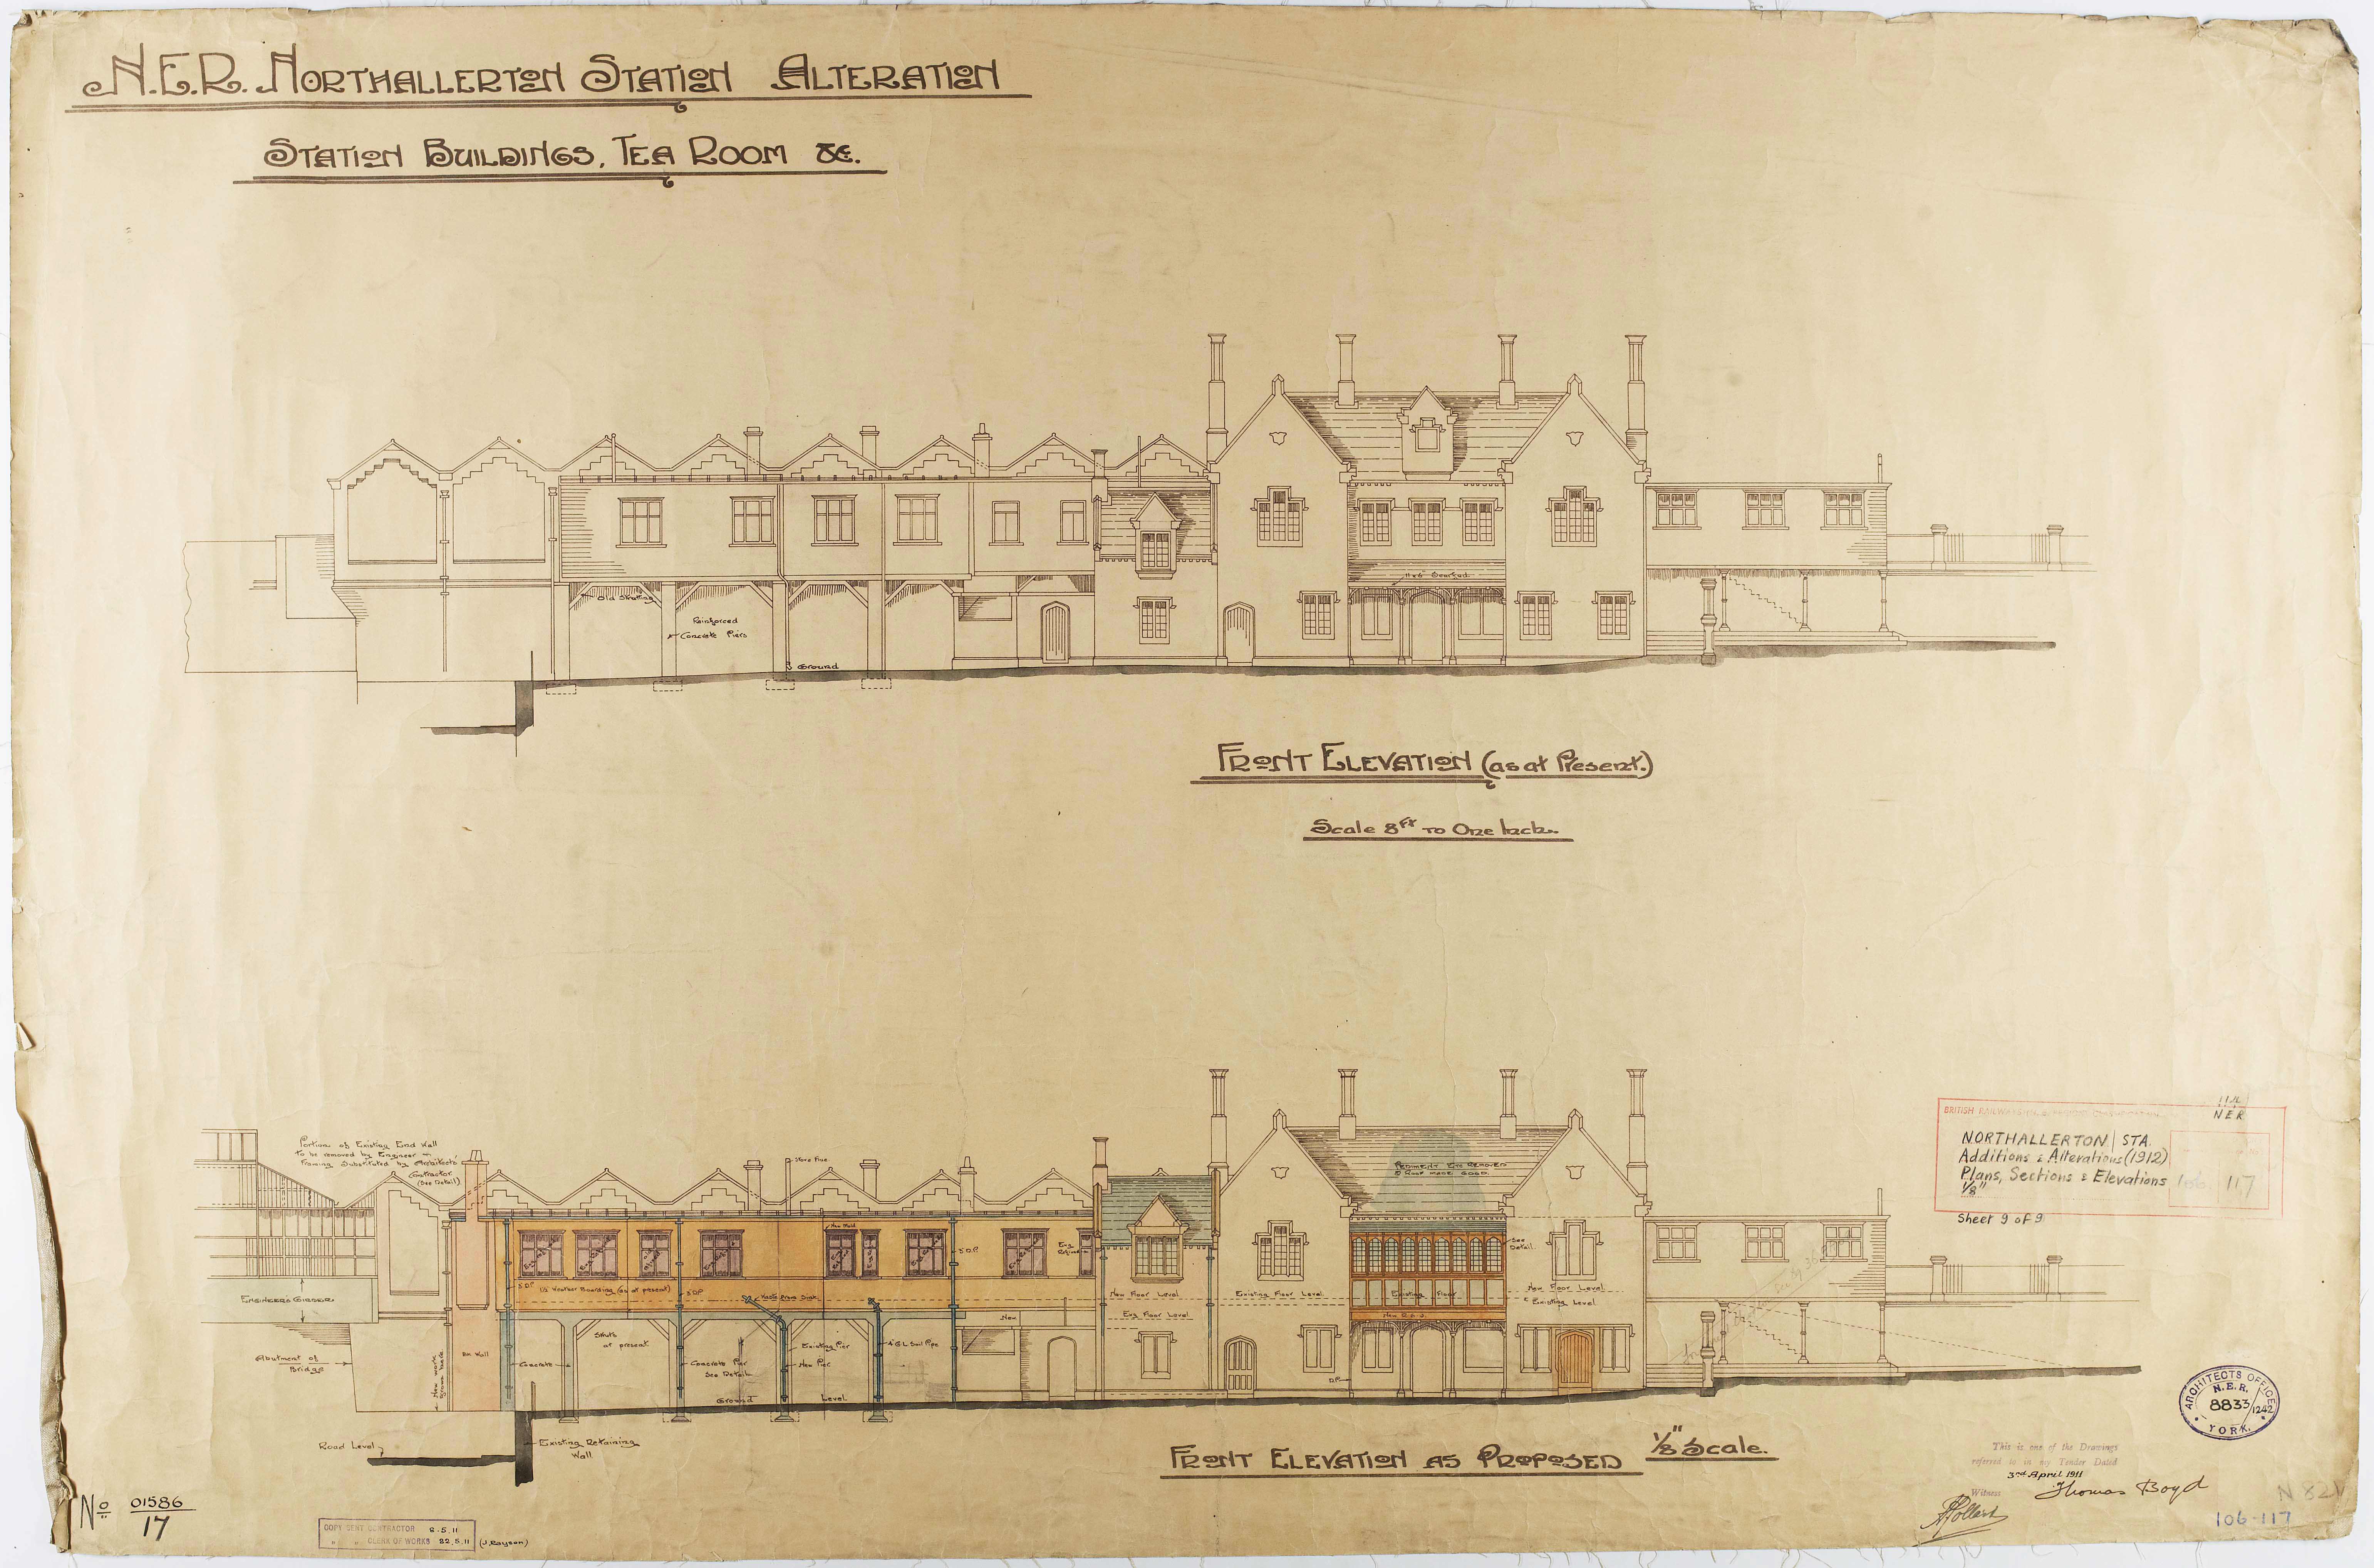 A plan showing Northallerton station alterations, 1911-1912.